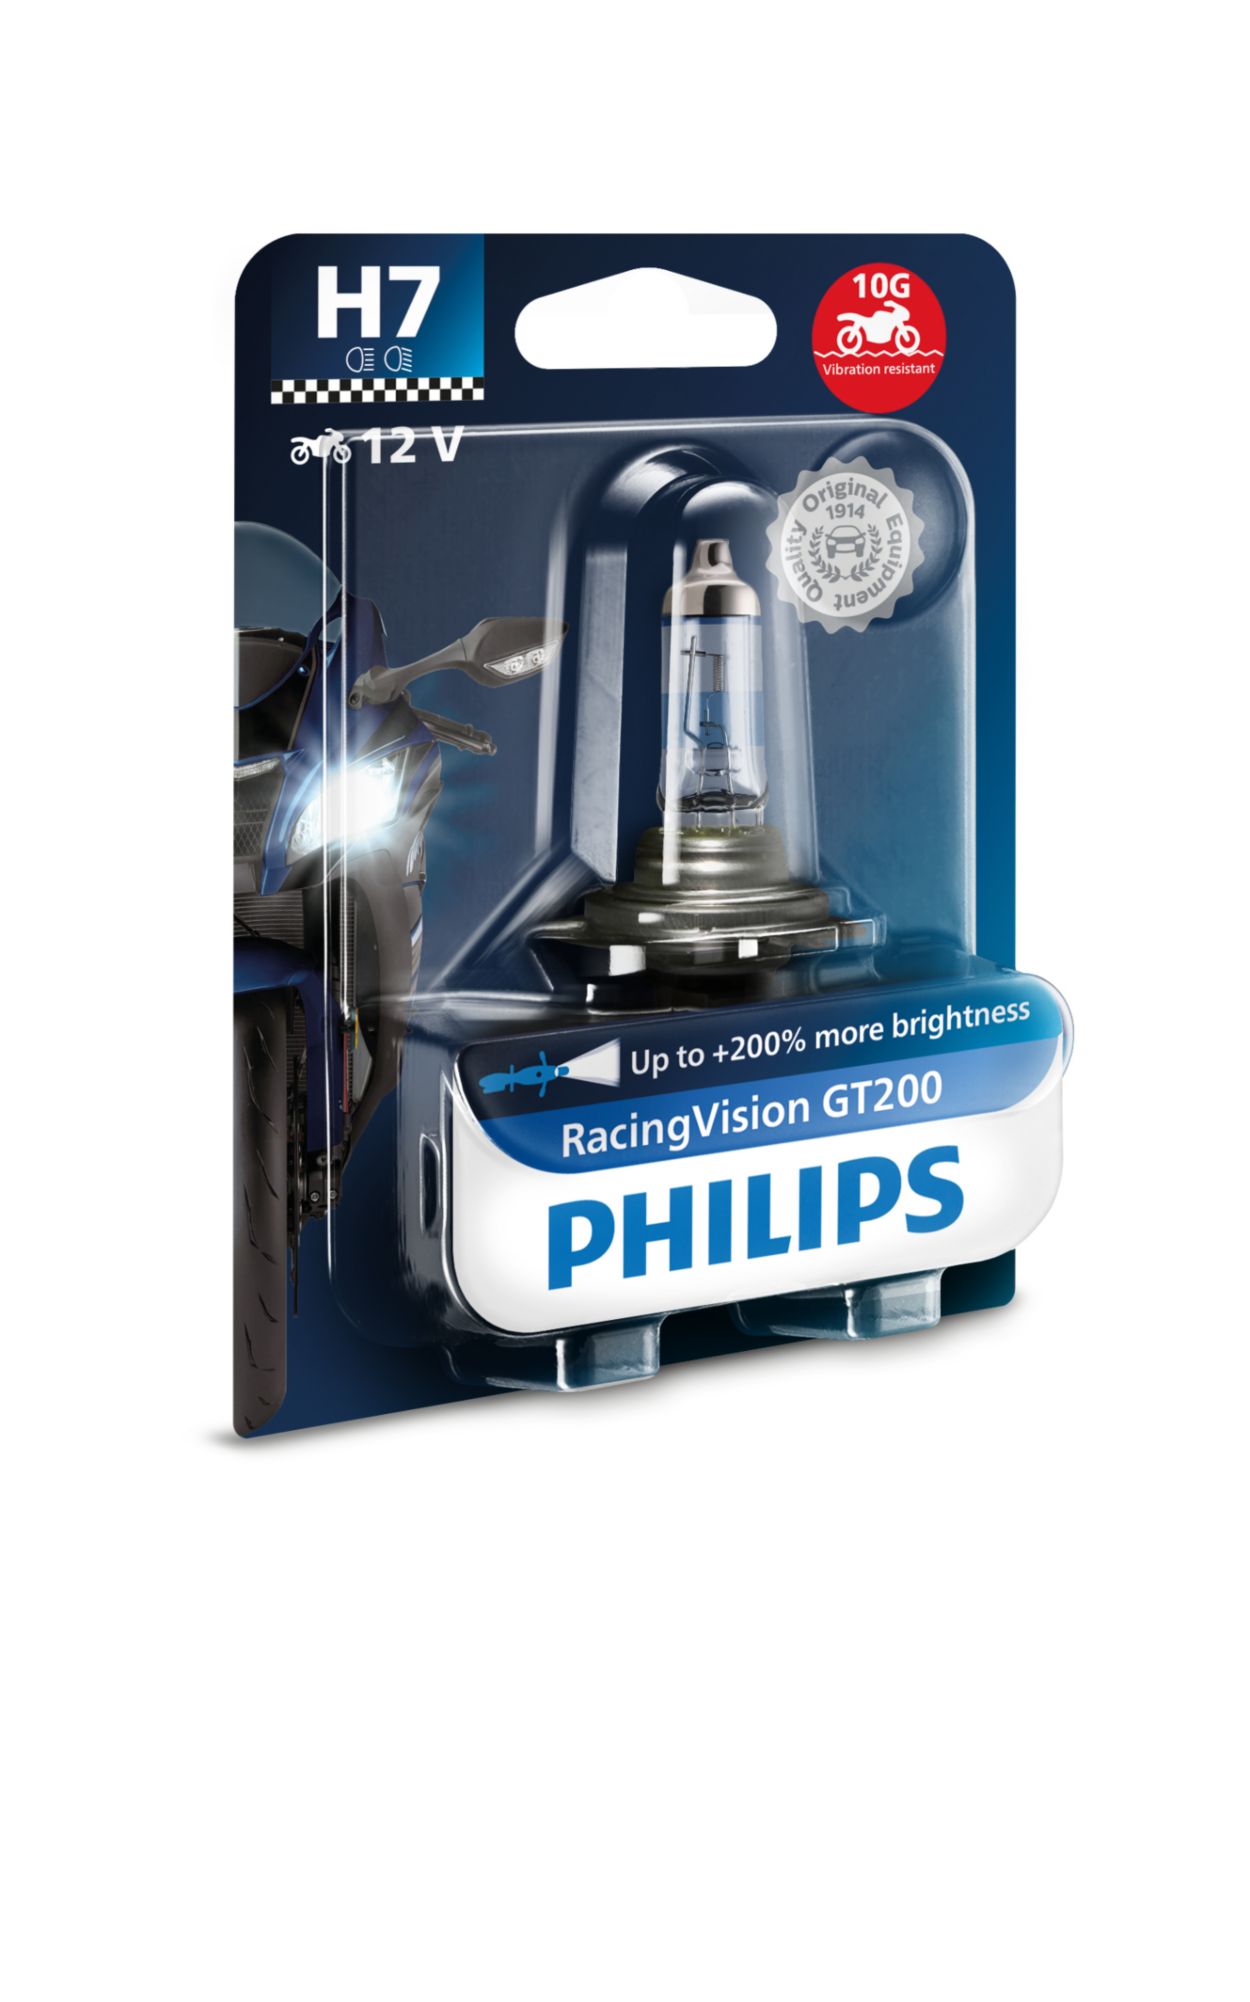 https://images.philips.com/is/image/philipsconsumer/c50b13cbc70d4a80bd86afe400876d38?$jpglarge$&wid=1250